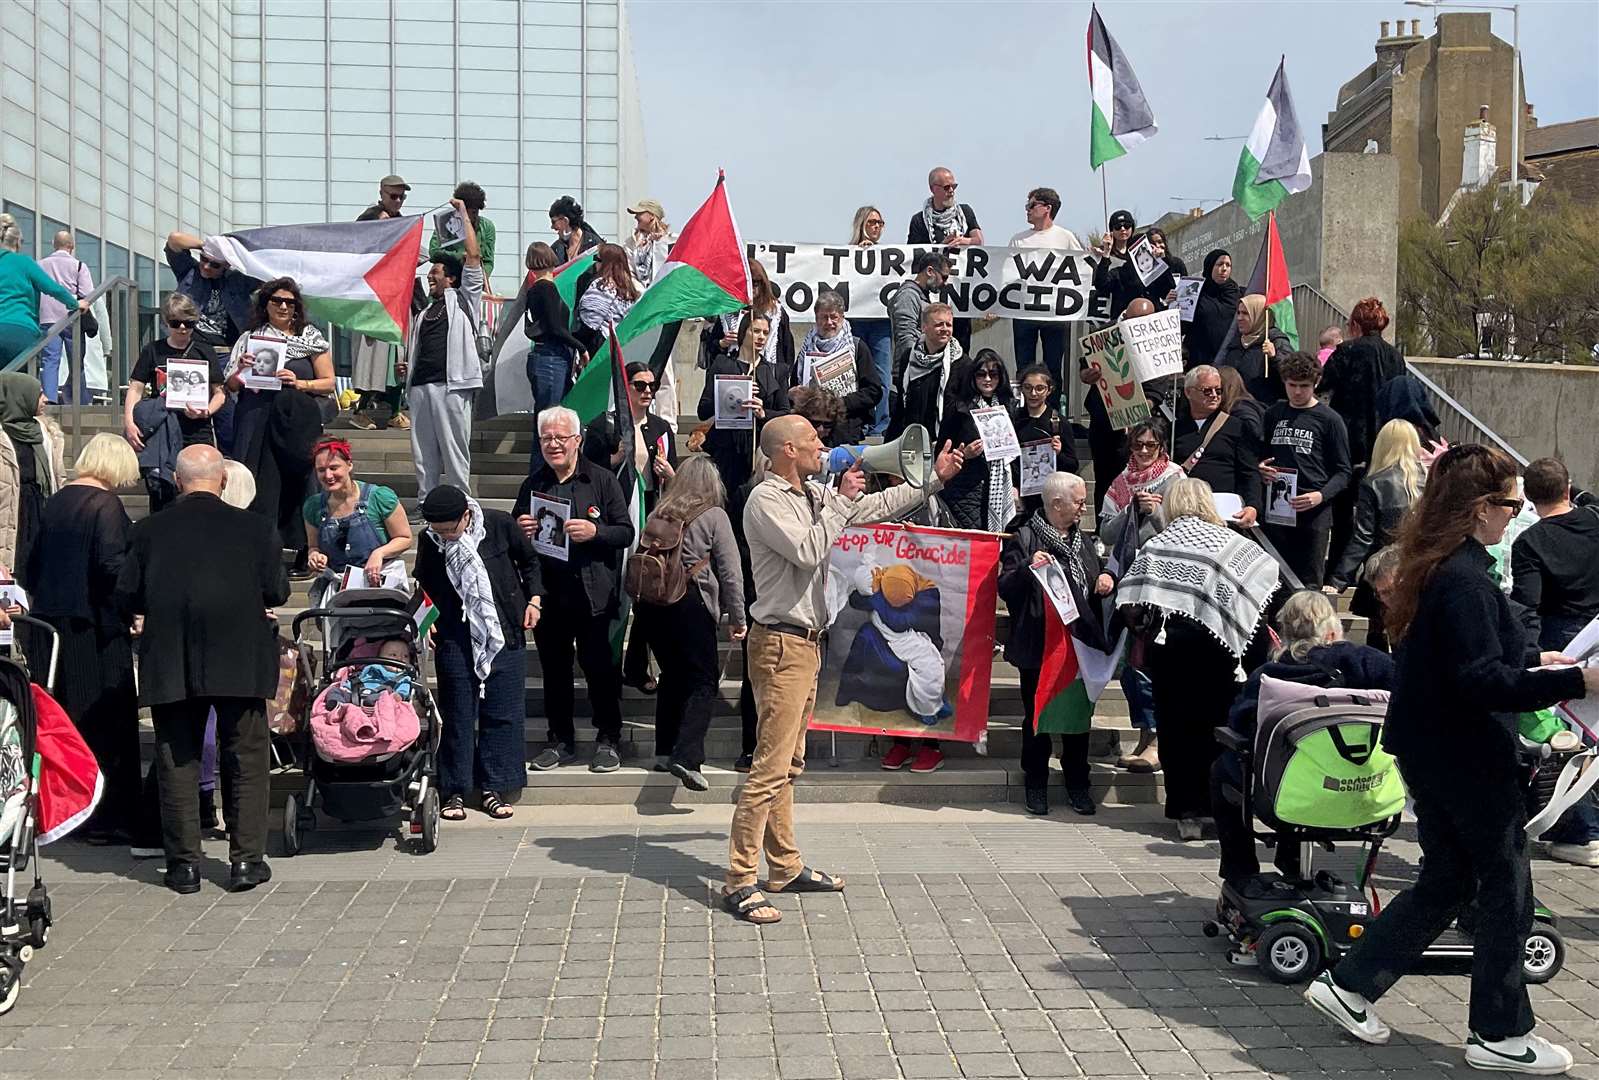 Protestors marched through Margate before gathering at the Turner Contemporary on Saturday. Picture: Thanet4Palestine